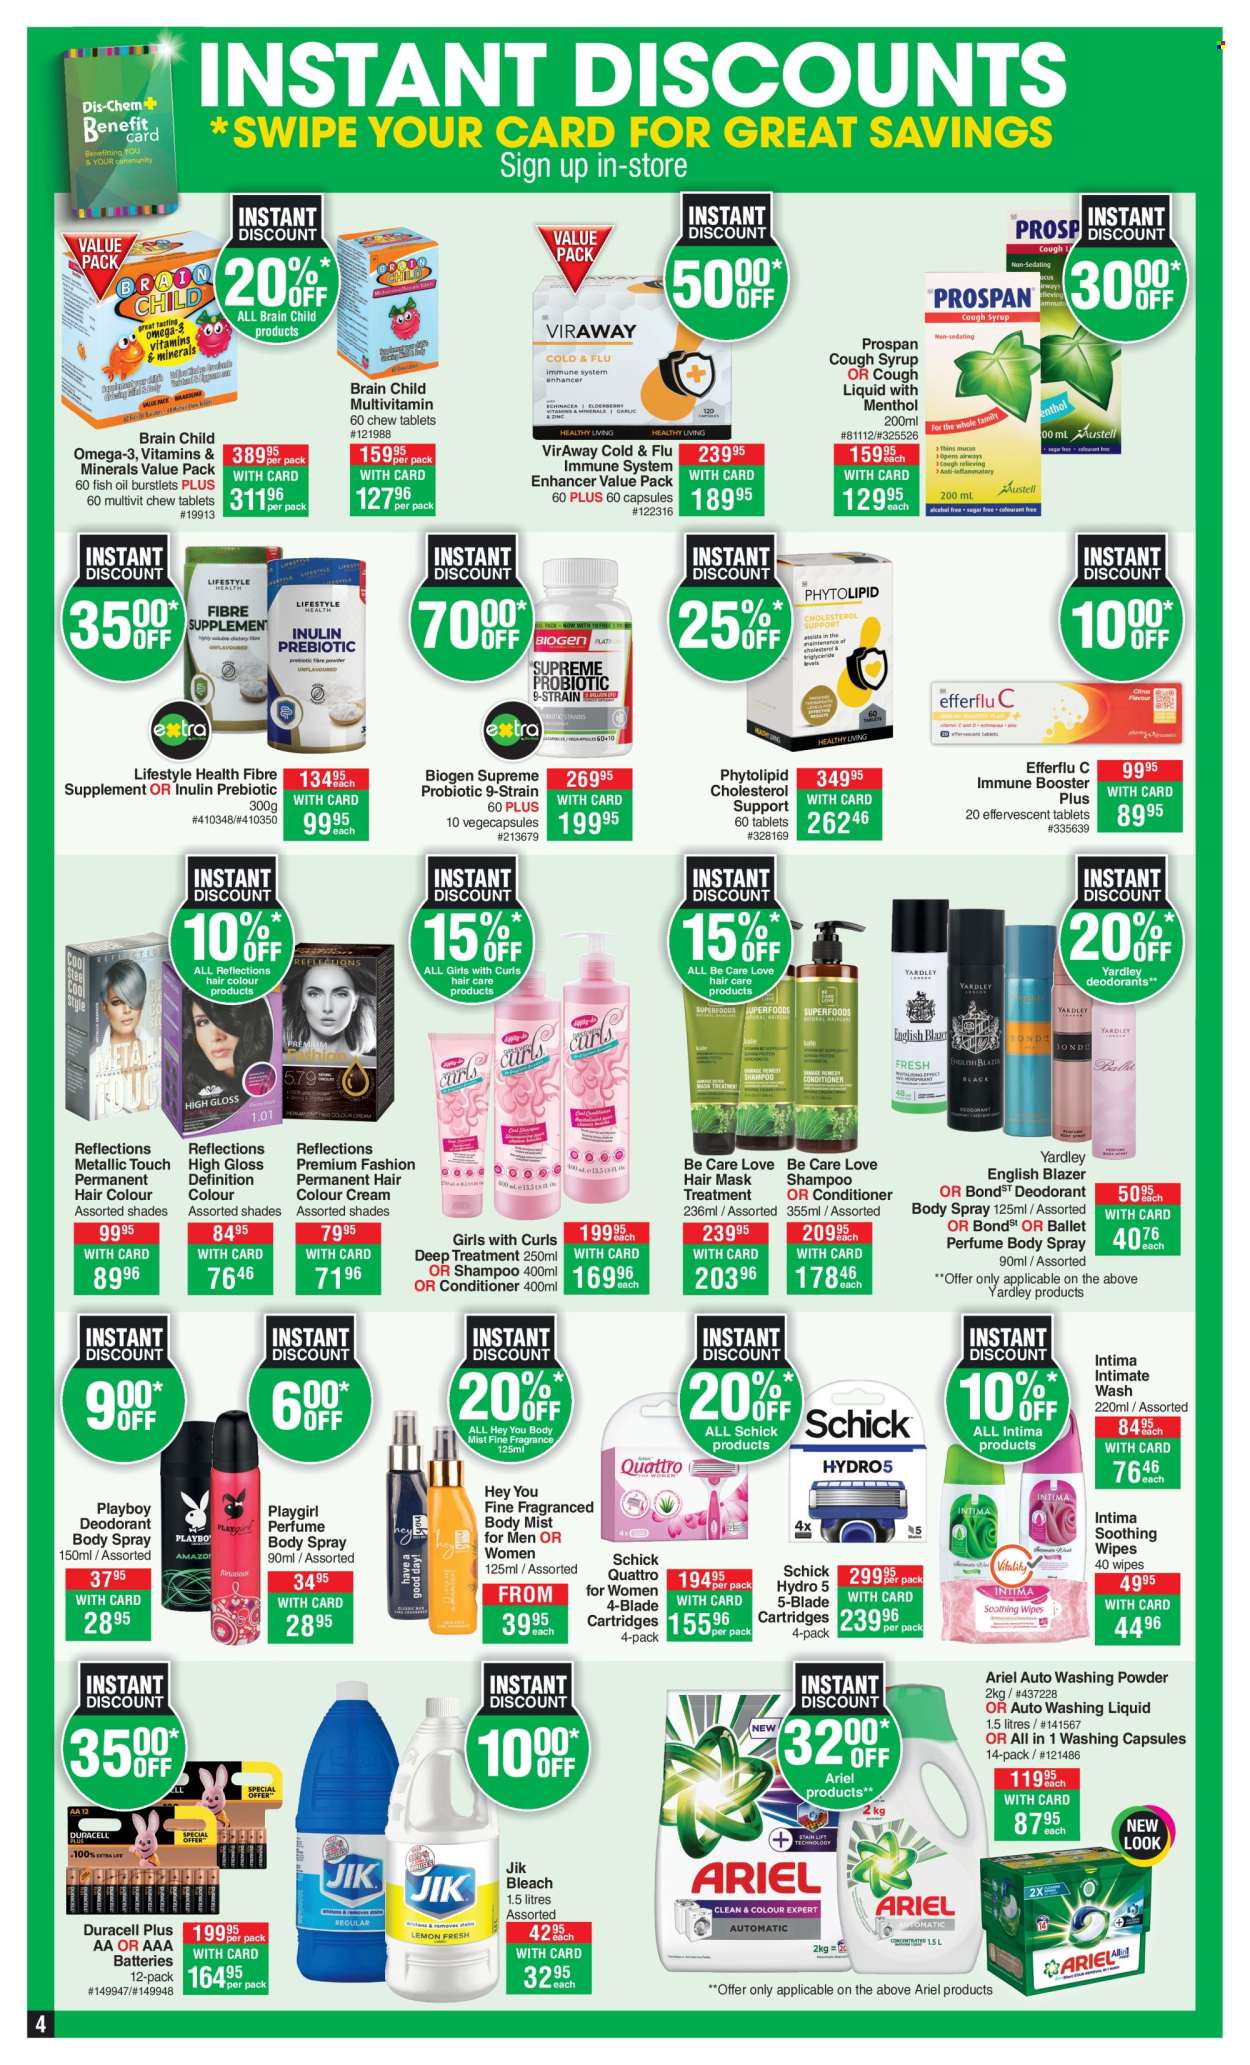 thumbnail - Dis-Chem catalogue  - 11/04/2024 - 12/05/2024 - Sales products - wipes, bleach, Ariel, laundry powder, shampoo, hair products, intimate wash, conditioner, hair color, hair mask, body mist, body spray, eau de parfum, fragrance, Playboy, English Blazer, Yardley, deodorant, Playgirl, Schick, shades, Cold & Flu, fish oil, multivitamin, Omega-3, syrup, dietary supplement, health supplement, vitamins, cough syrup. Page 4.